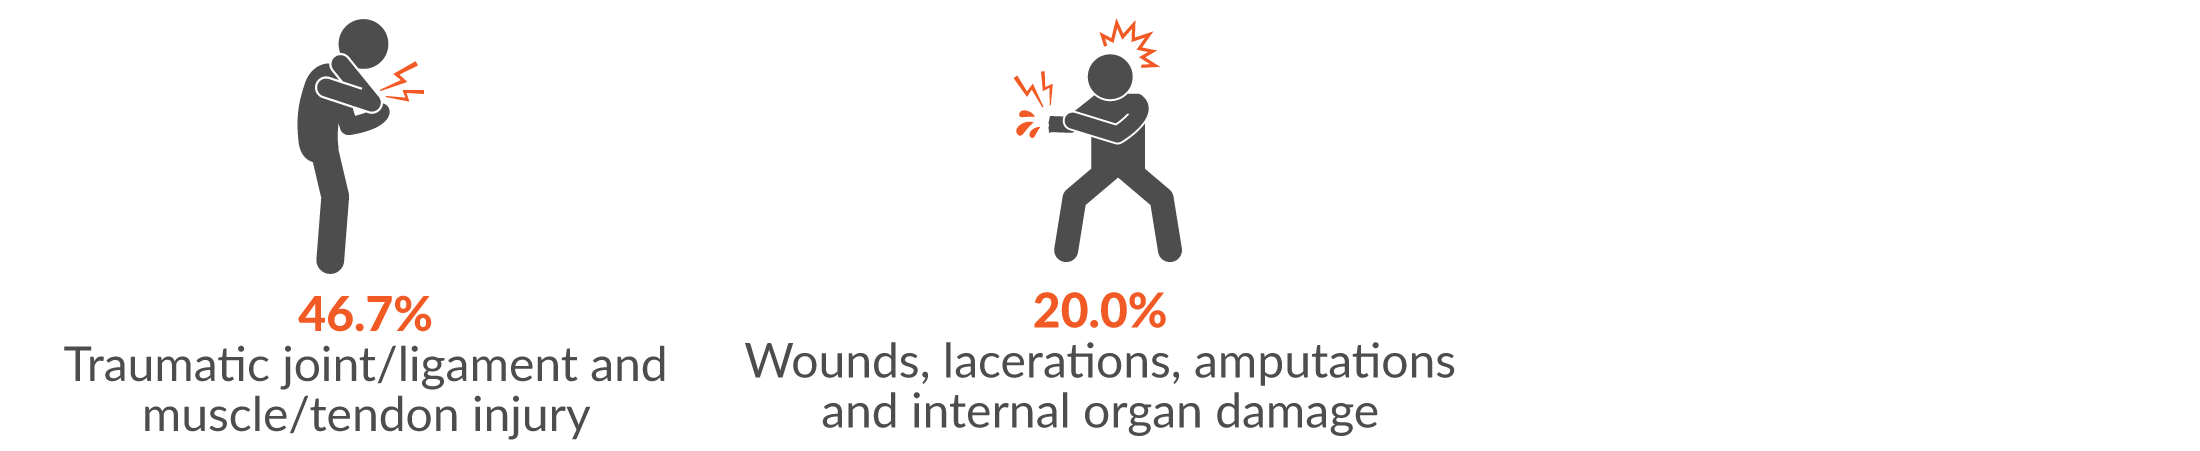 This infographic shows the main three injury groups resulting from being hit by a moving object were 46.2% traumatic joint/ligament and muscle/tendon injury; 23.1% wounds, lacerations, amputations and internal organ damage; and 15.4% intracranial injuries.